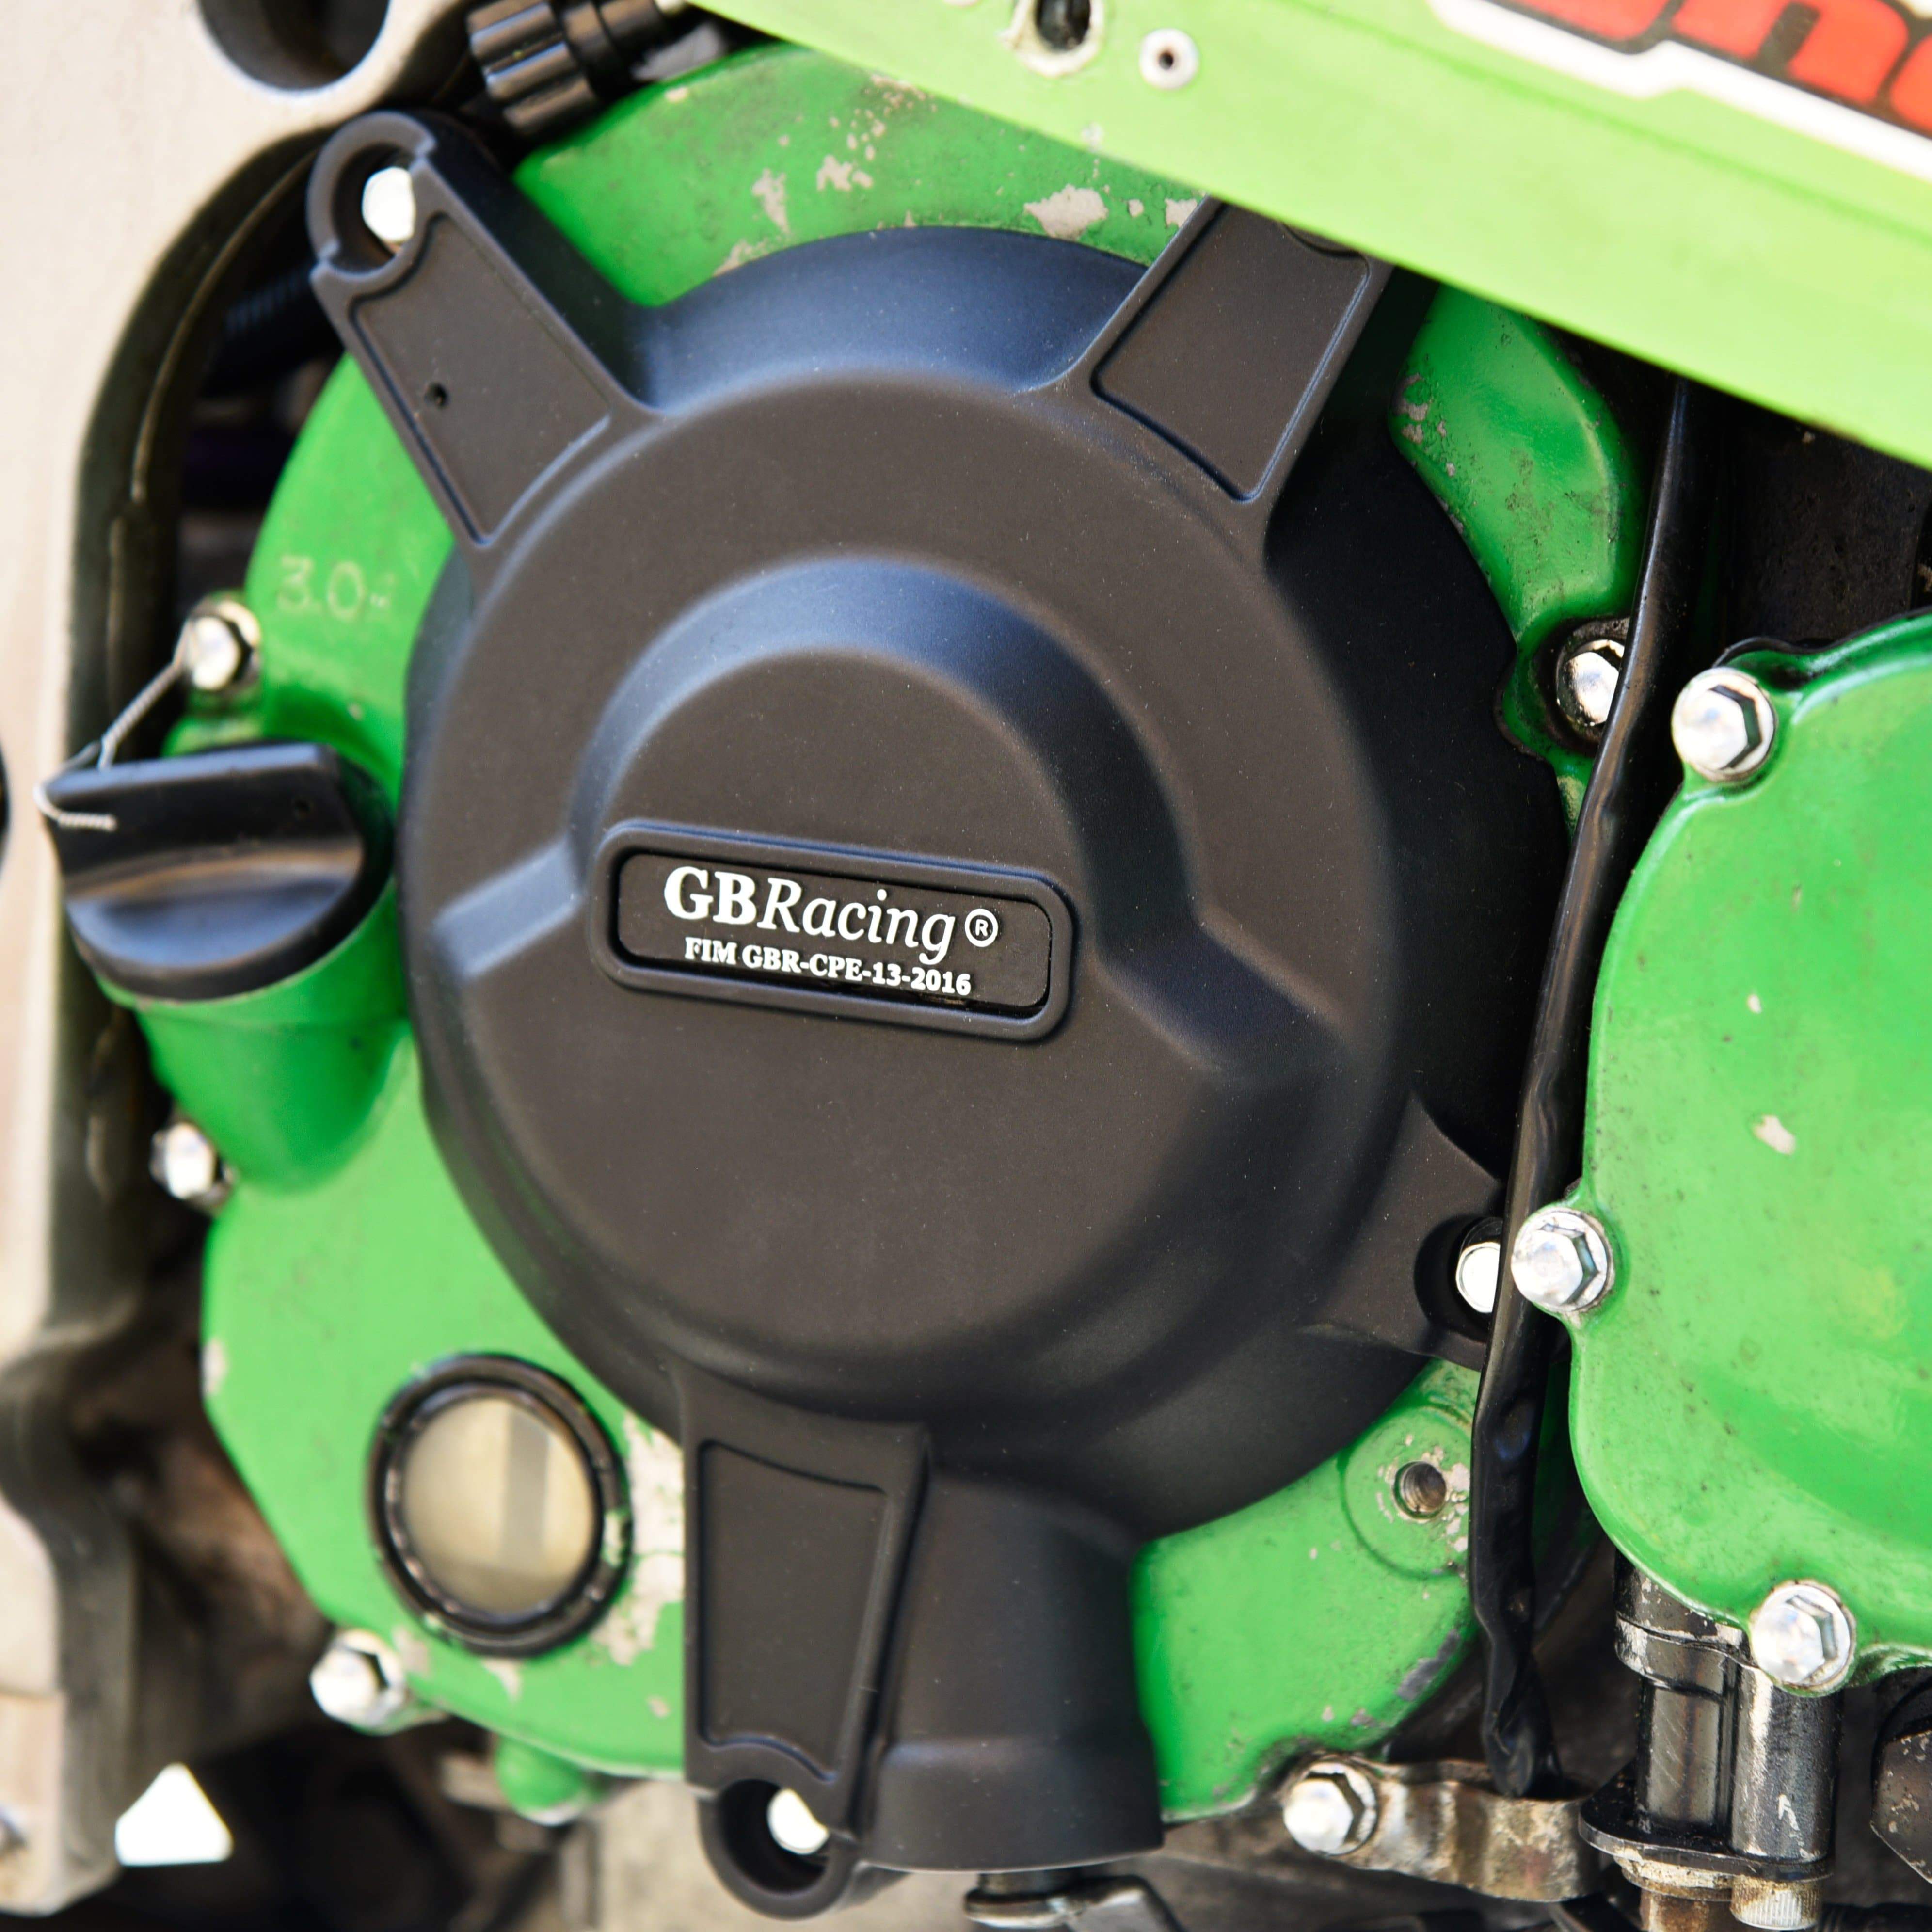 GBRacing Engine Cover - Secondary Clutch Cover | Kawasaki ZXR 400 1991>2003-EC-ZXR400-L1-L9-2-GBR-Engine Covers-Pyramid Motorcycle Accessories